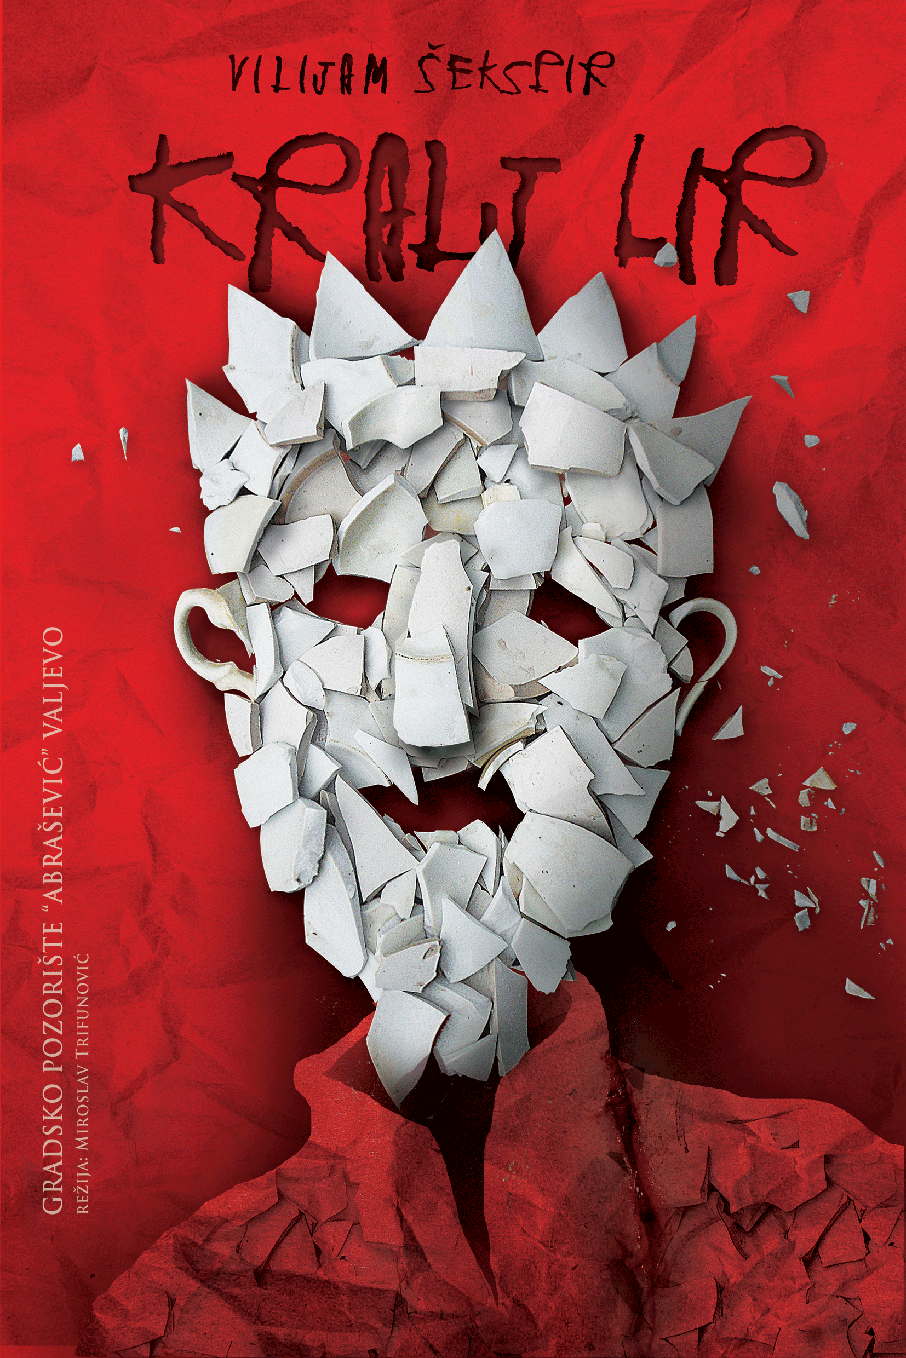 photo manipulation king lear teater poster art play